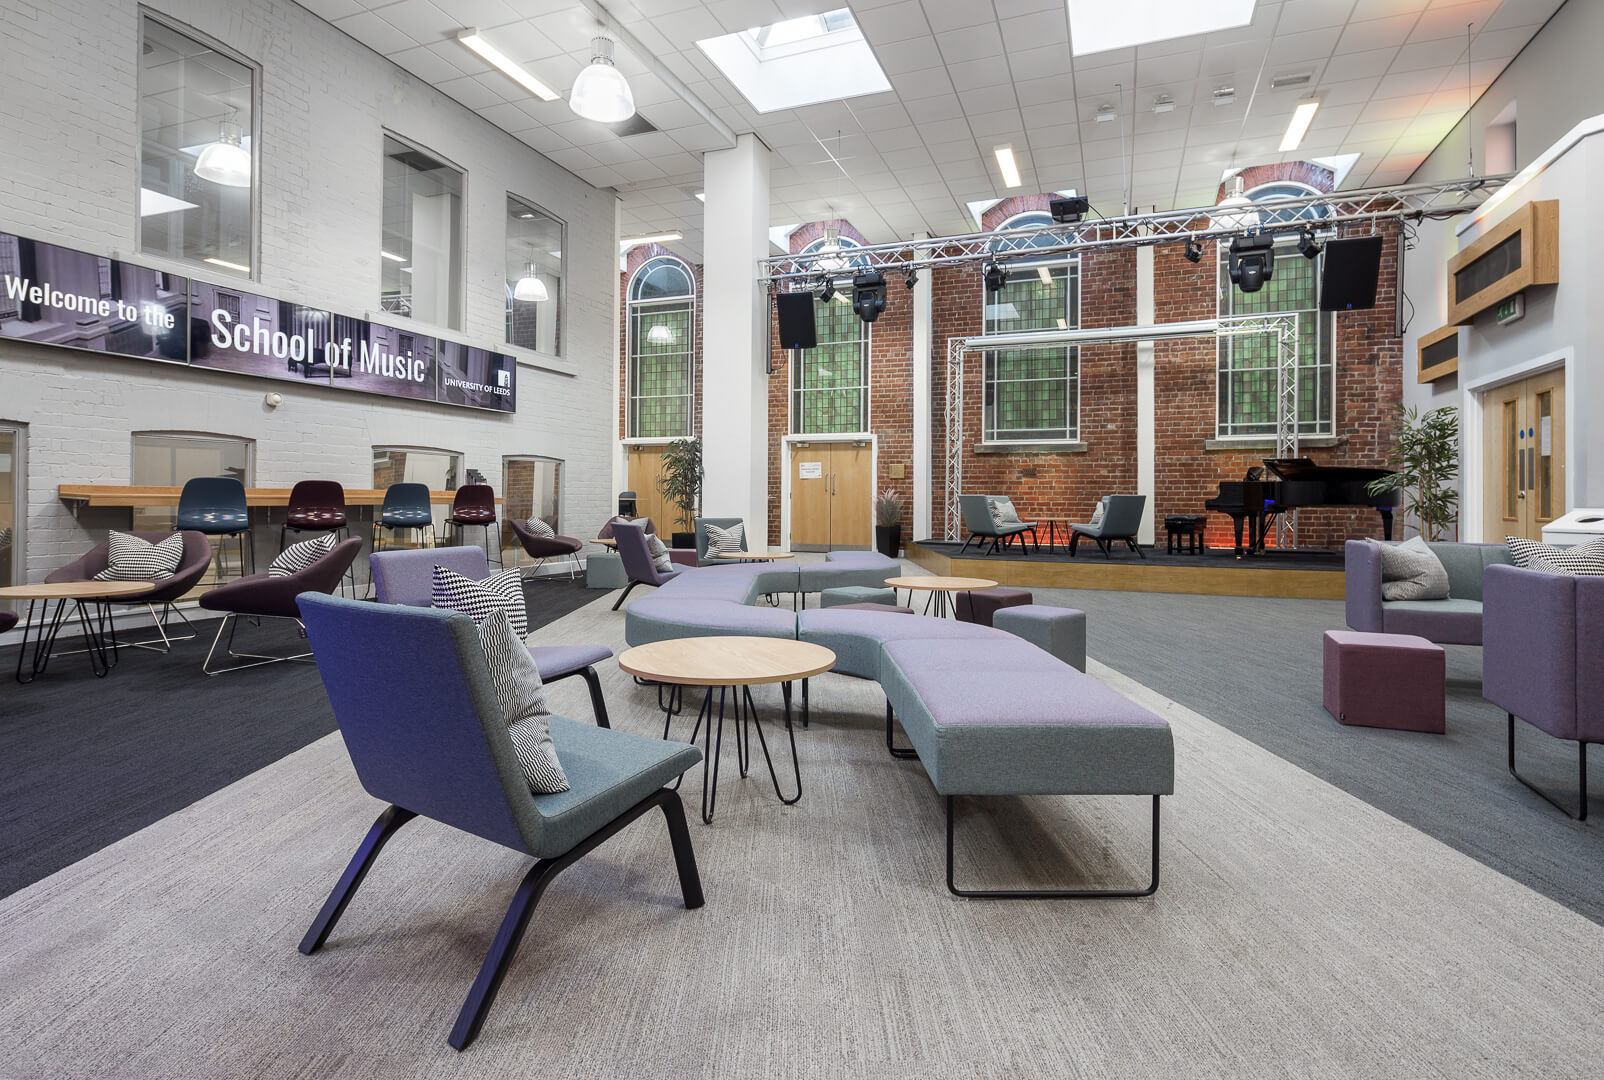 Commercial architectural interior photography- Refurbishment at the School of Music, University of Leeds